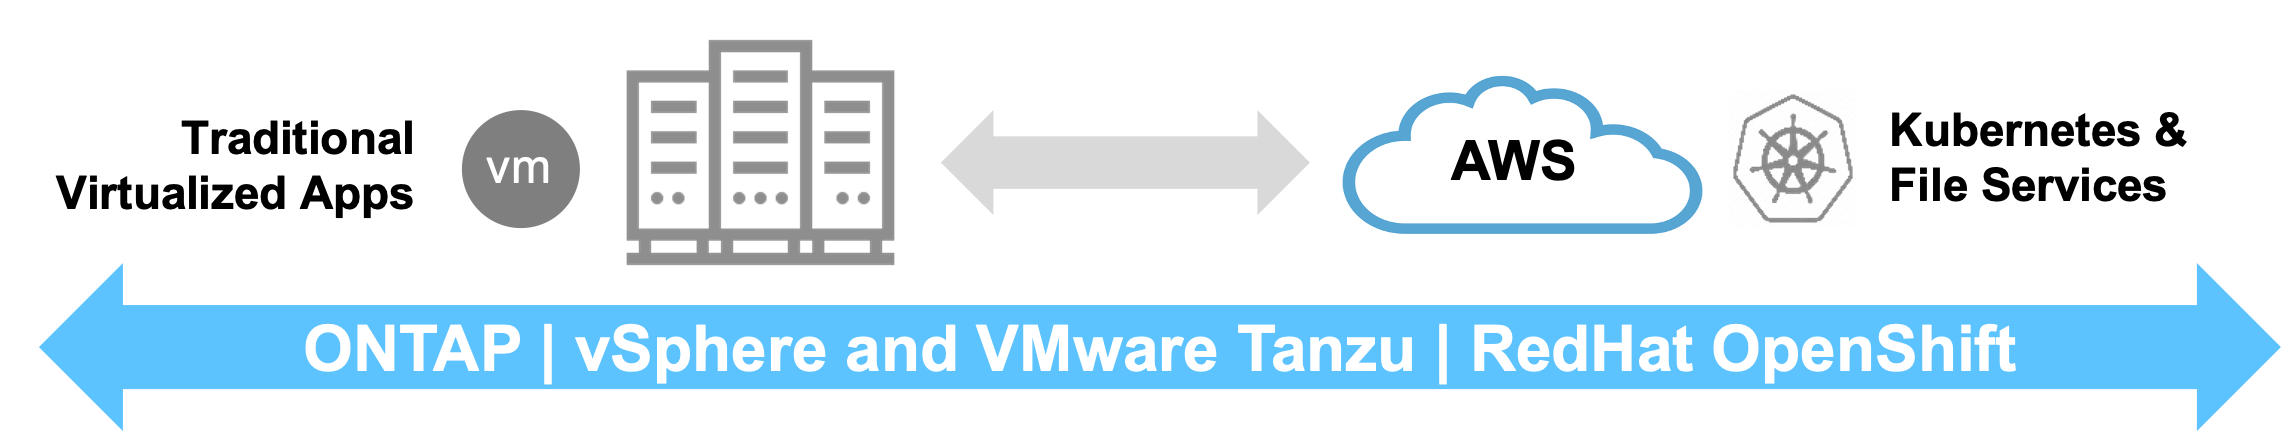 vmware story3a